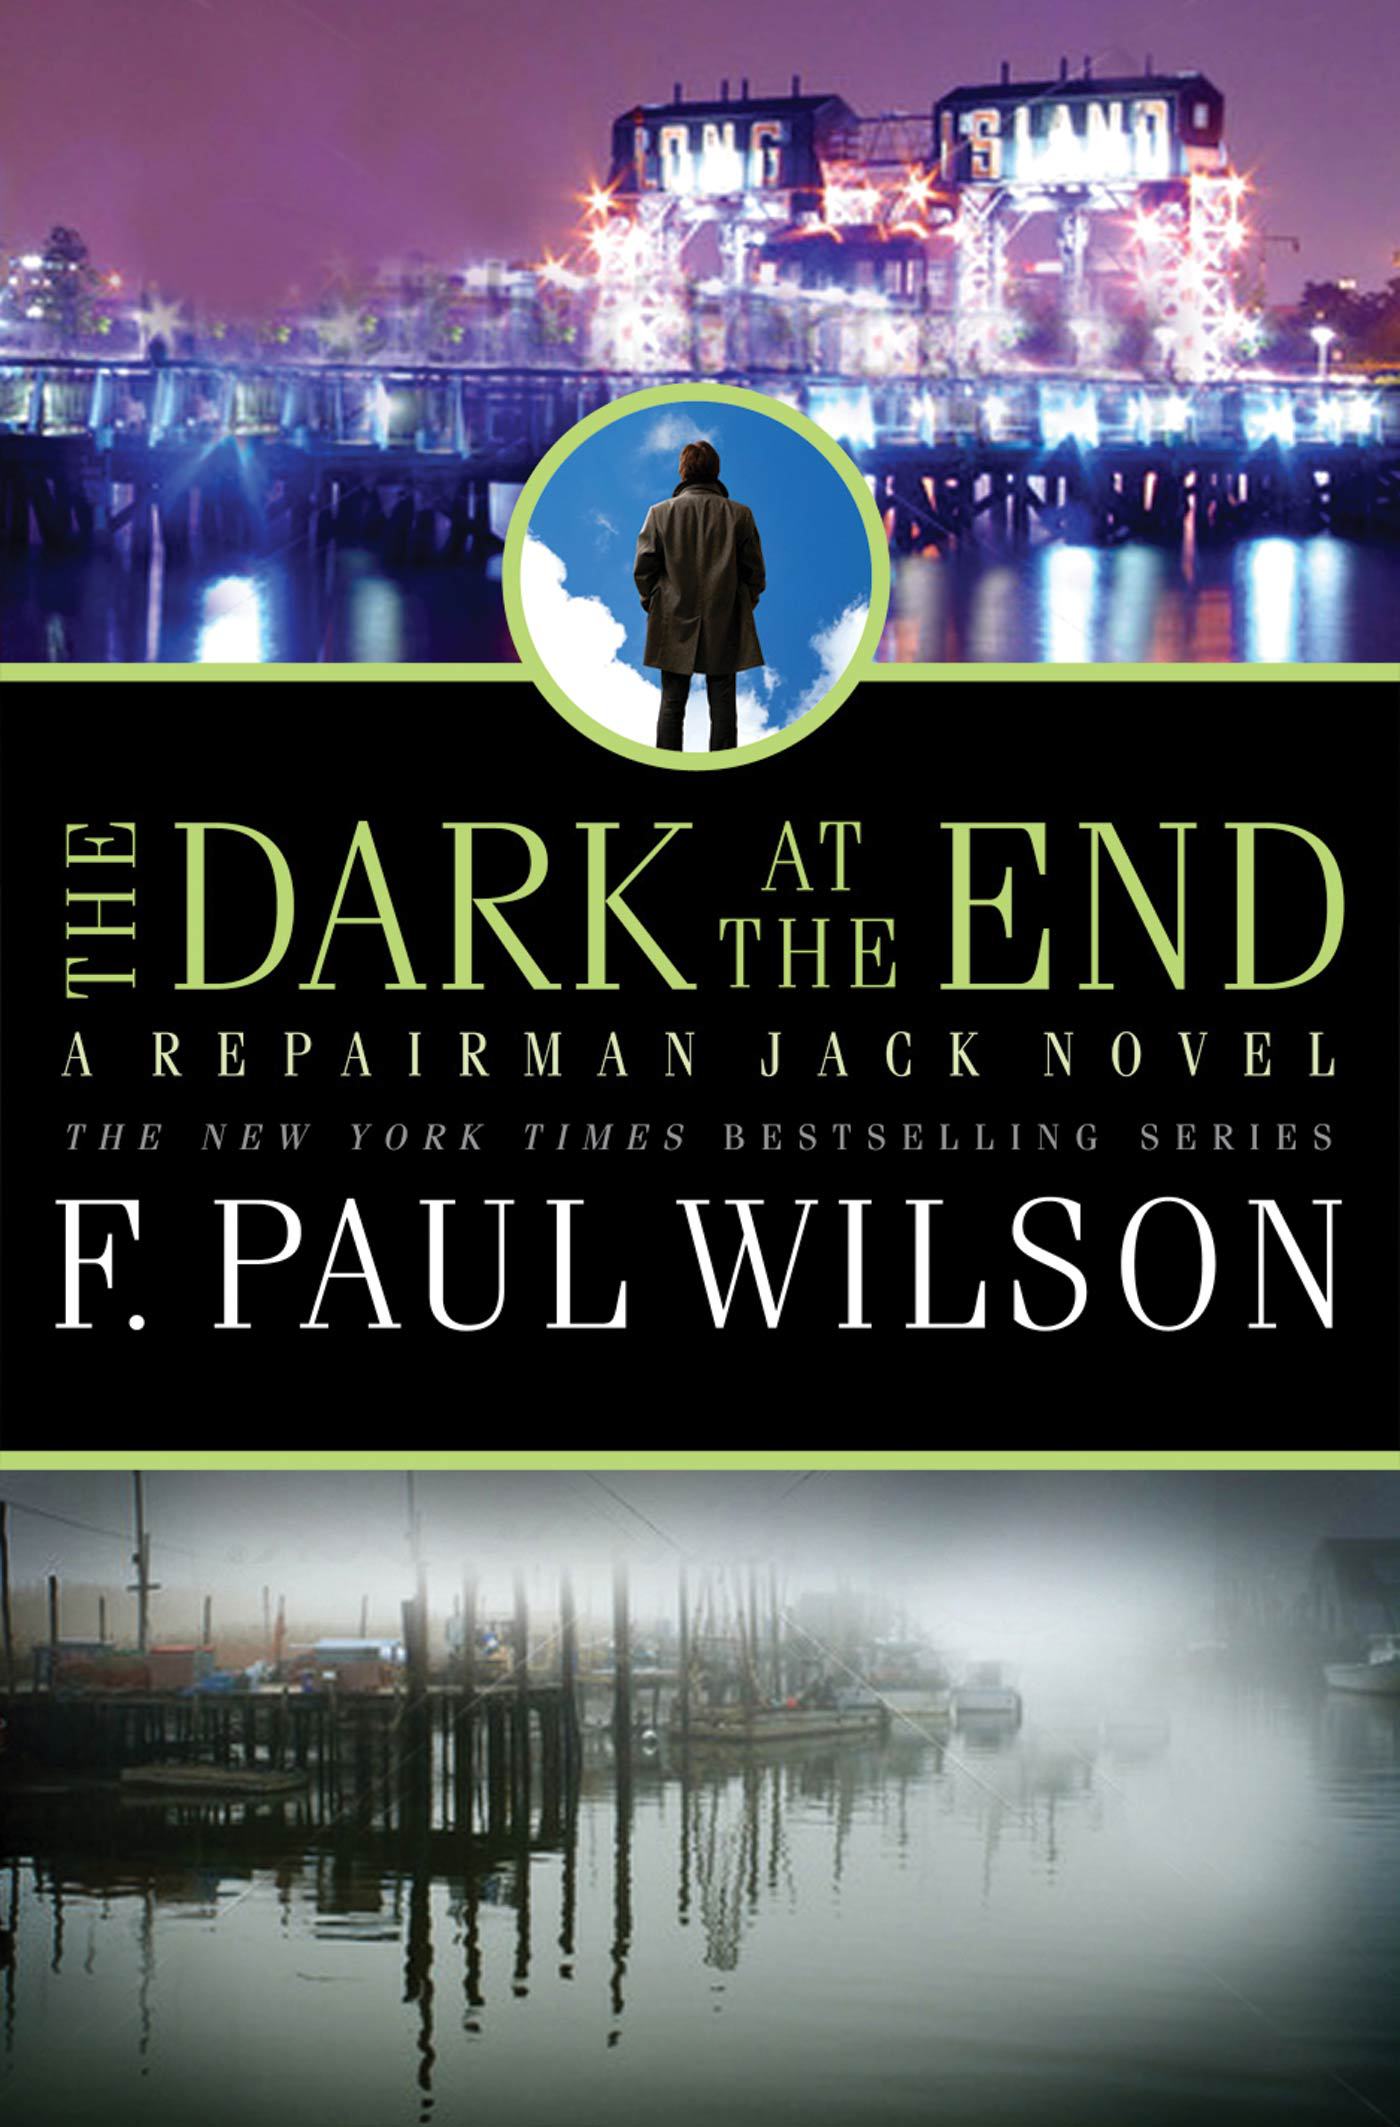 The Dark at the End : A Repairman Jack Novel by F. Paul Wilson